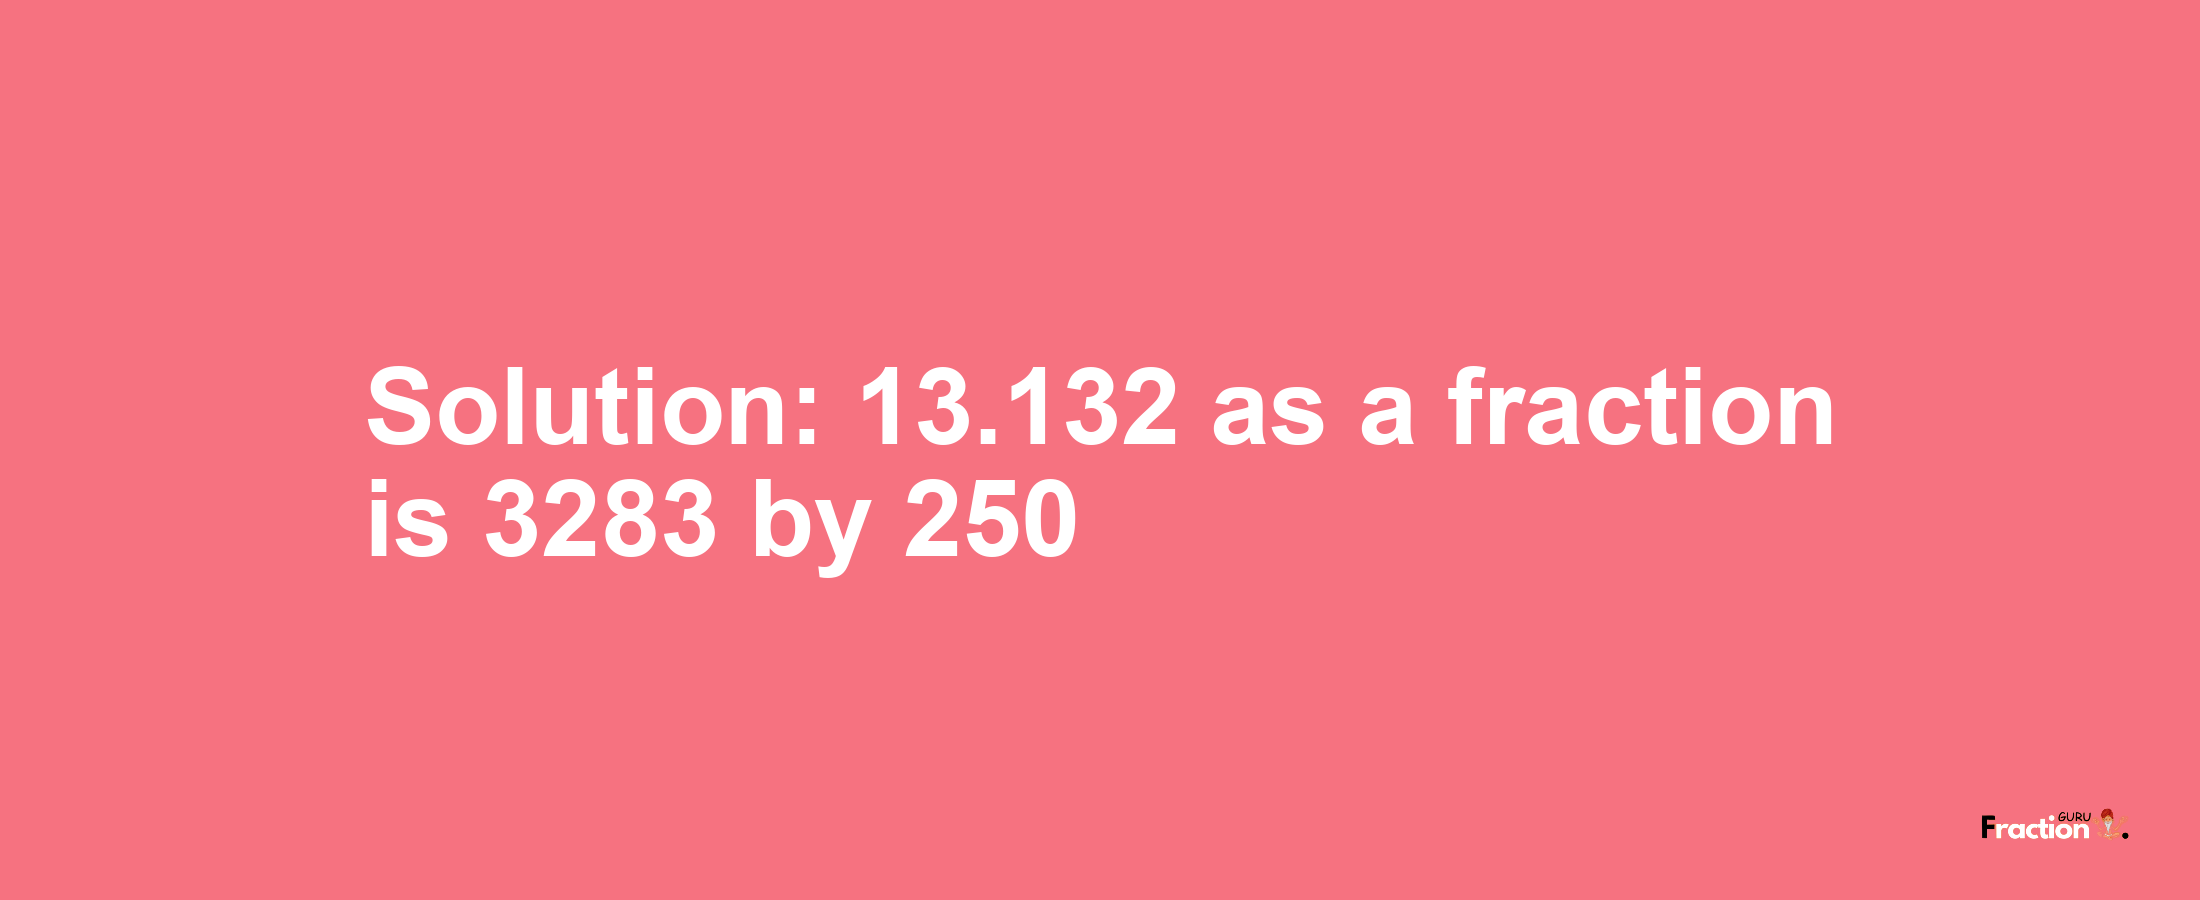 Solution:13.132 as a fraction is 3283/250